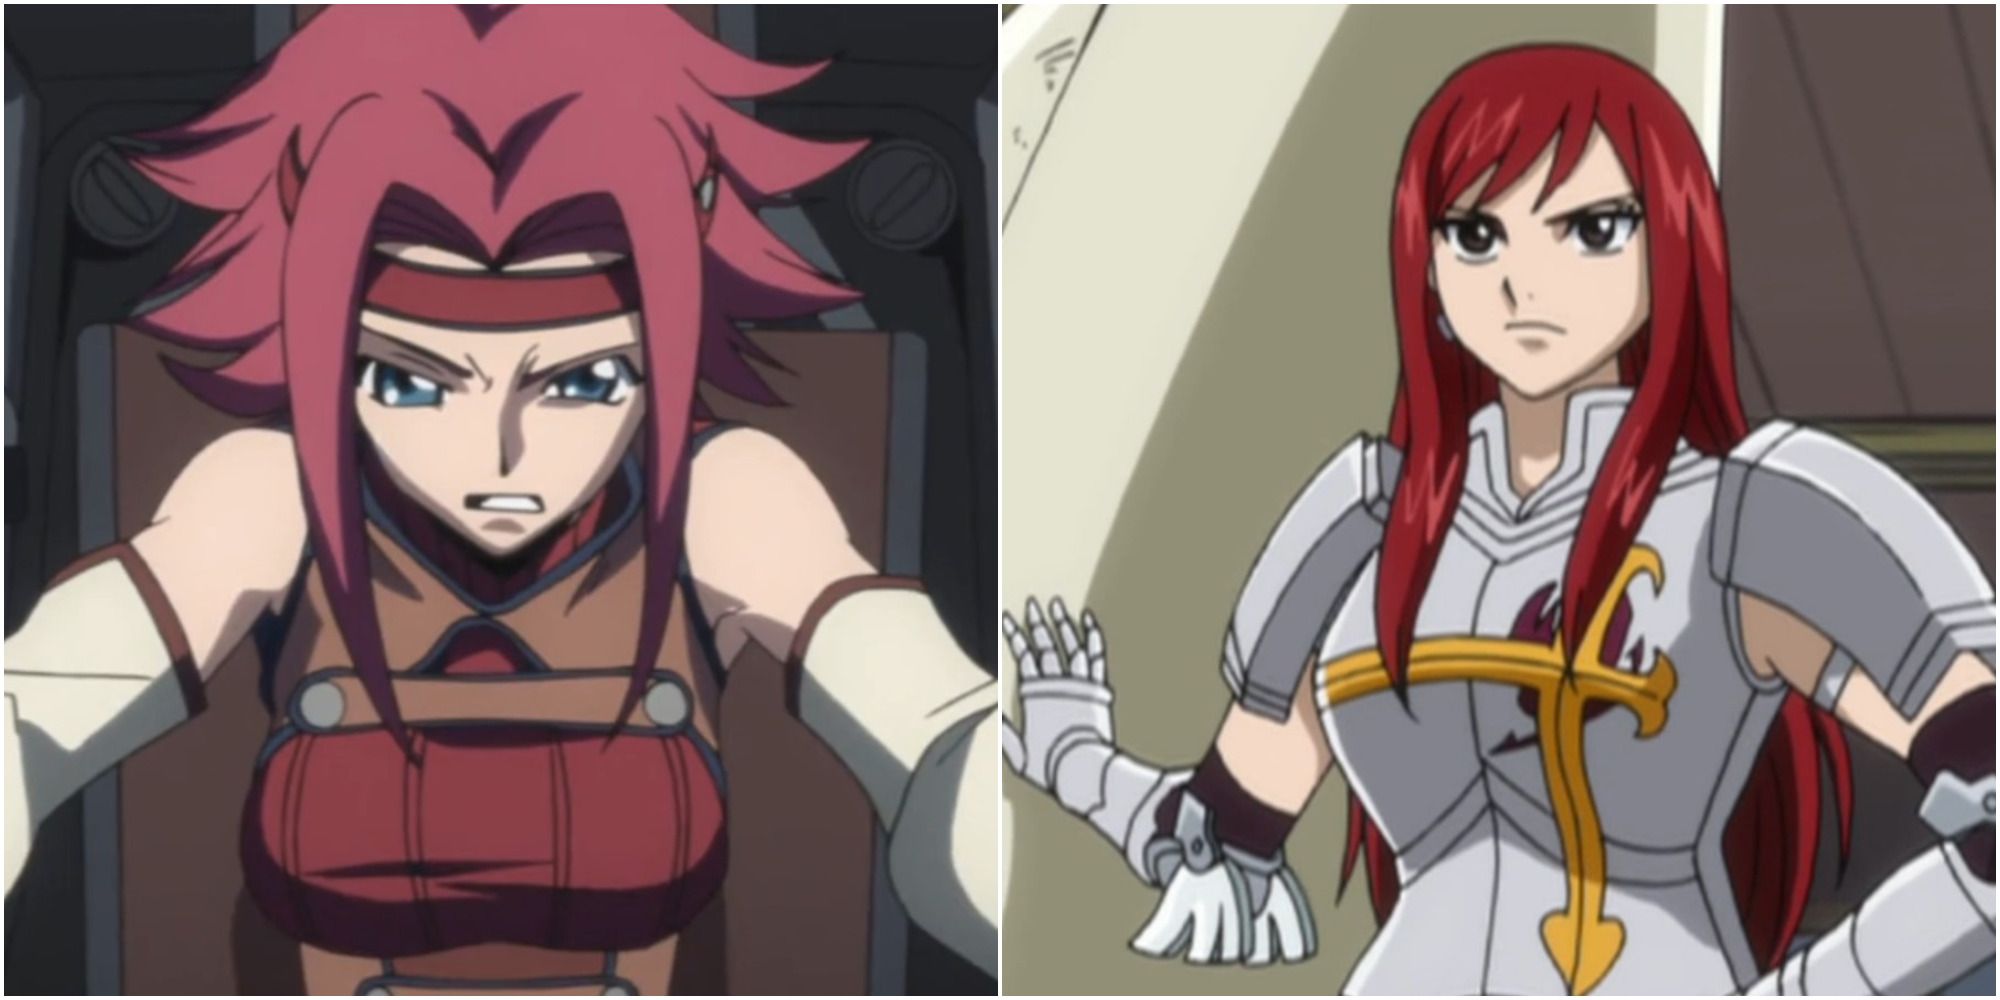 ciara moore add red haired anime woman photo